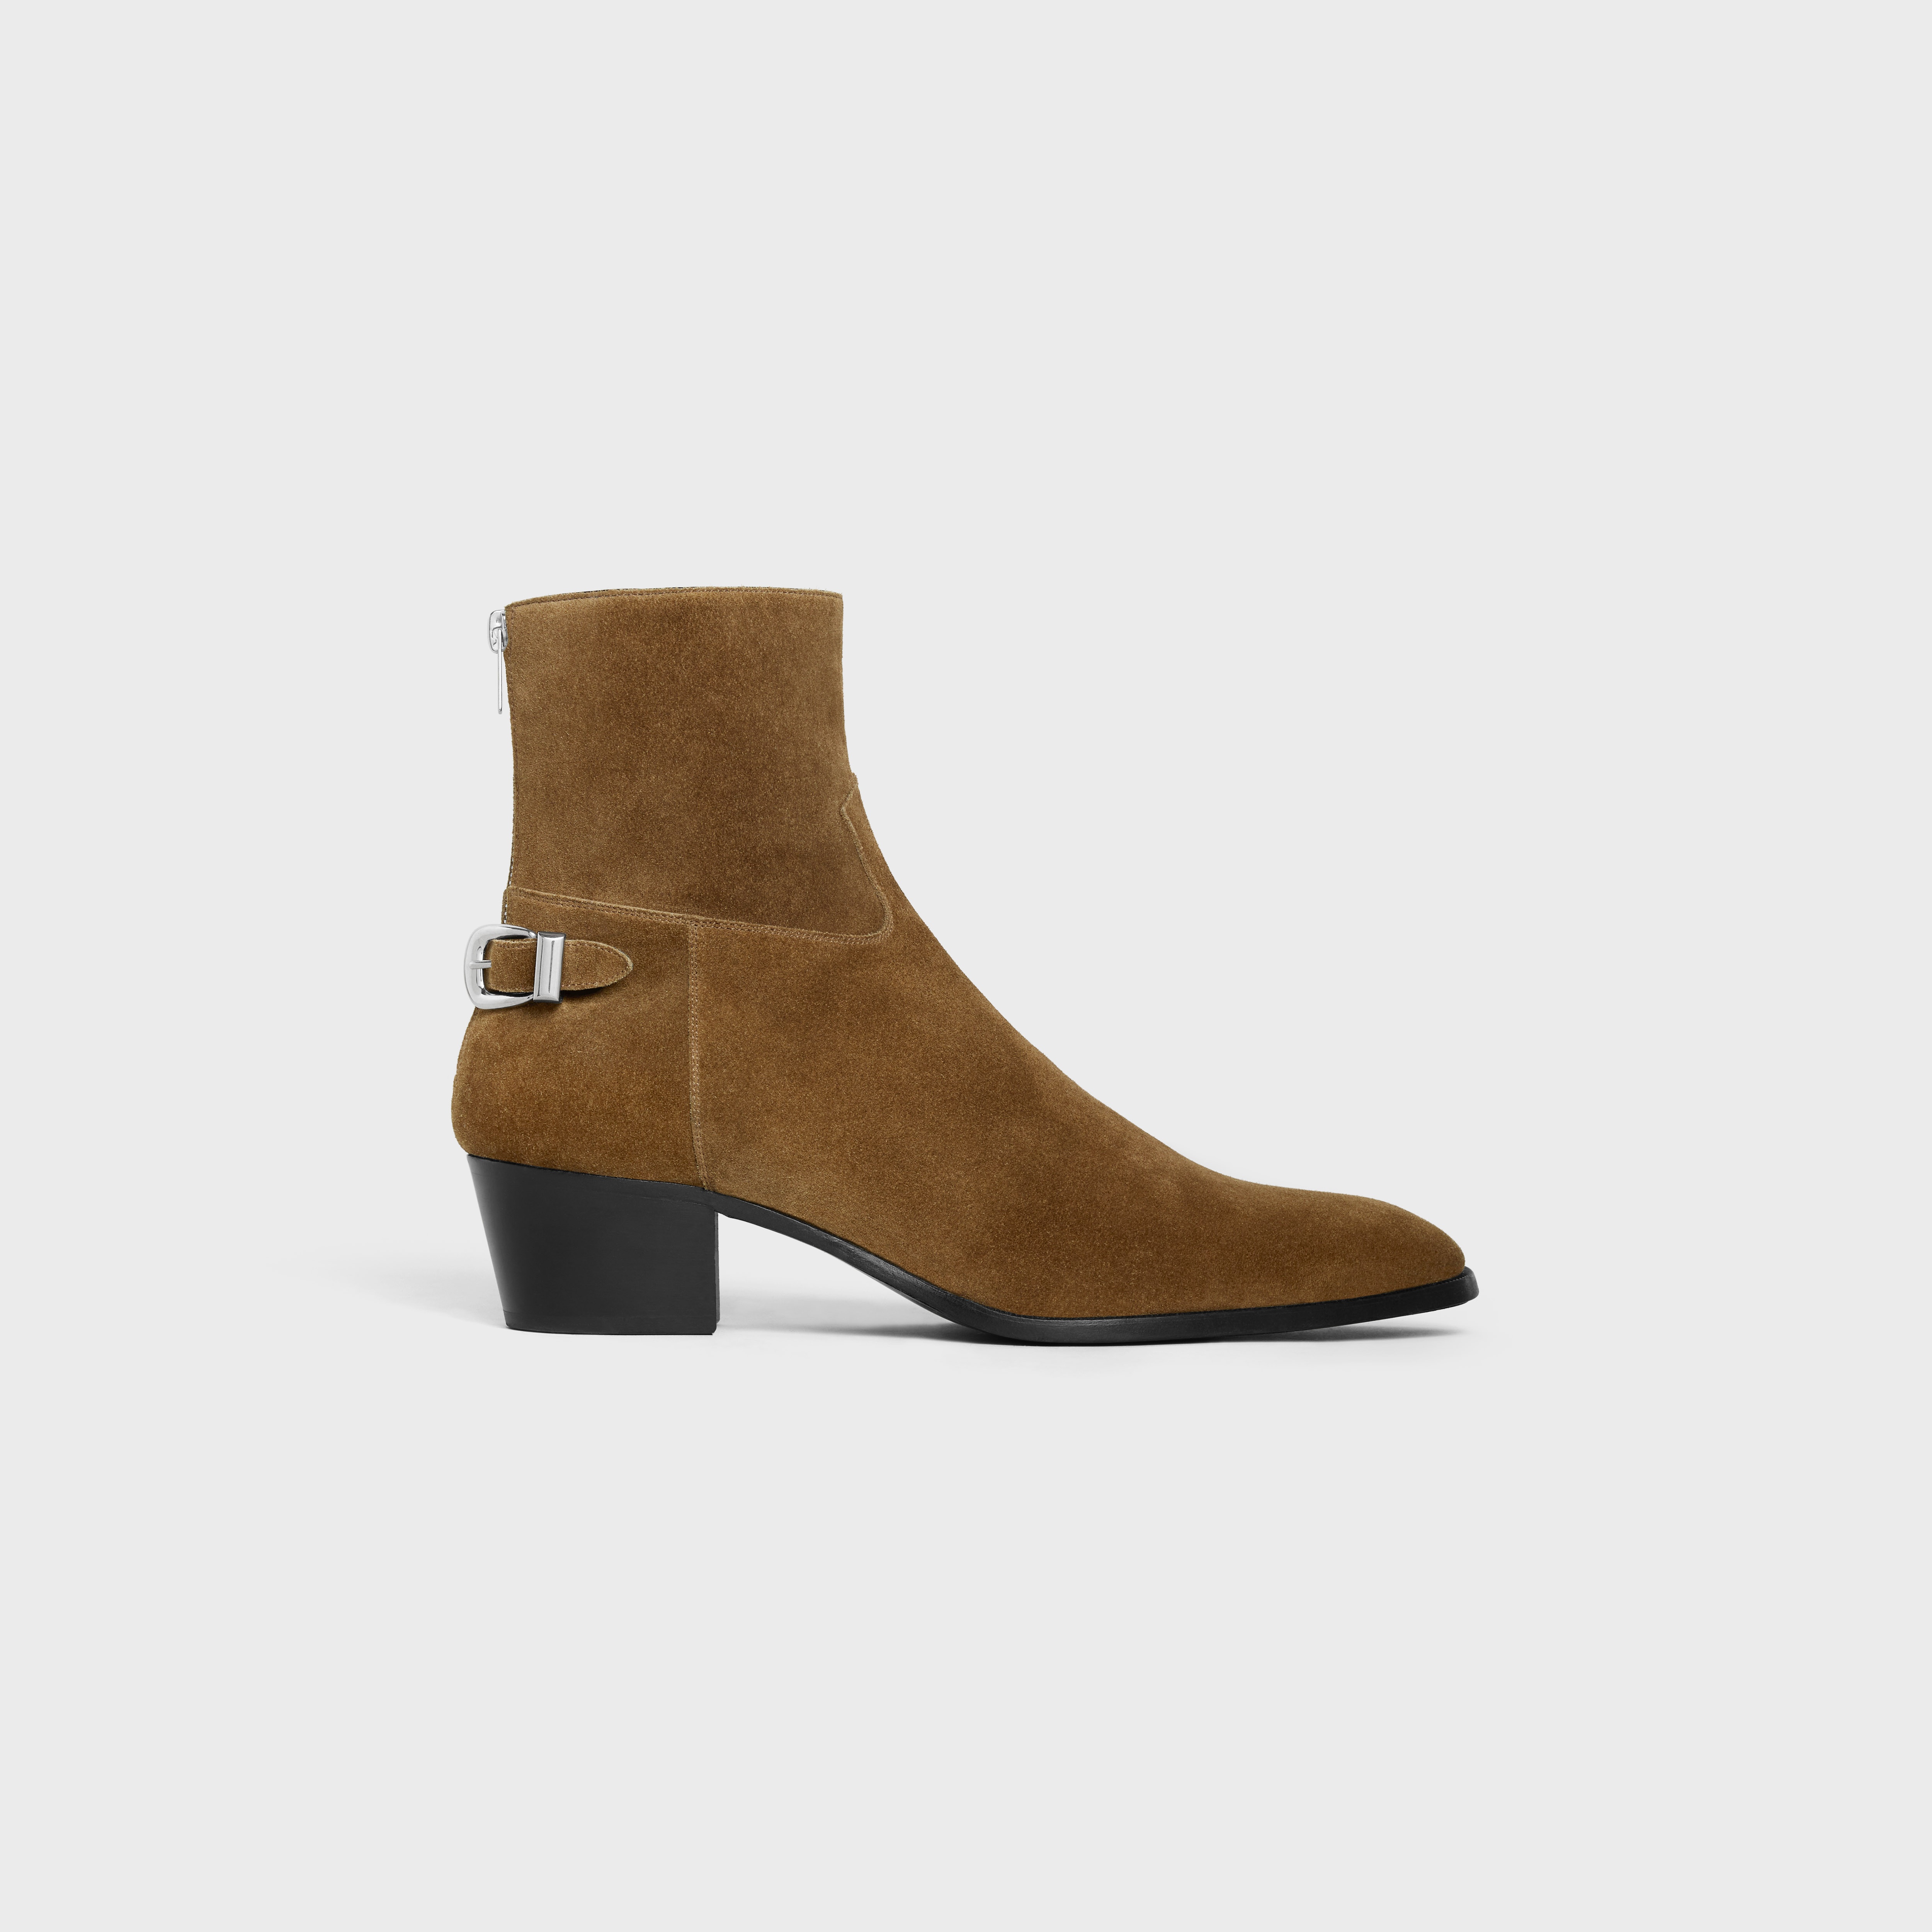 BACK BUCKLE ZIPPED ISAAC BOOT in Suede Calfskin - 1